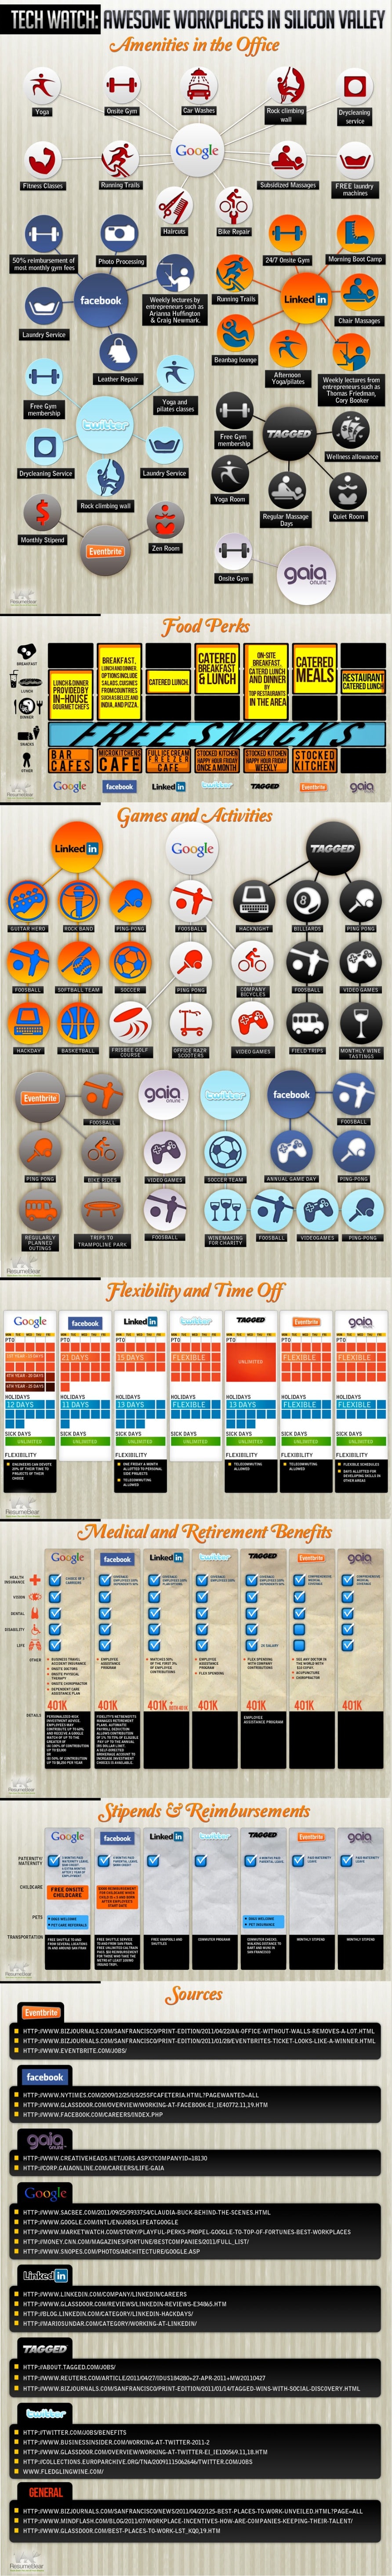 The Awesomeness Of Silicon Valley [Infographic]